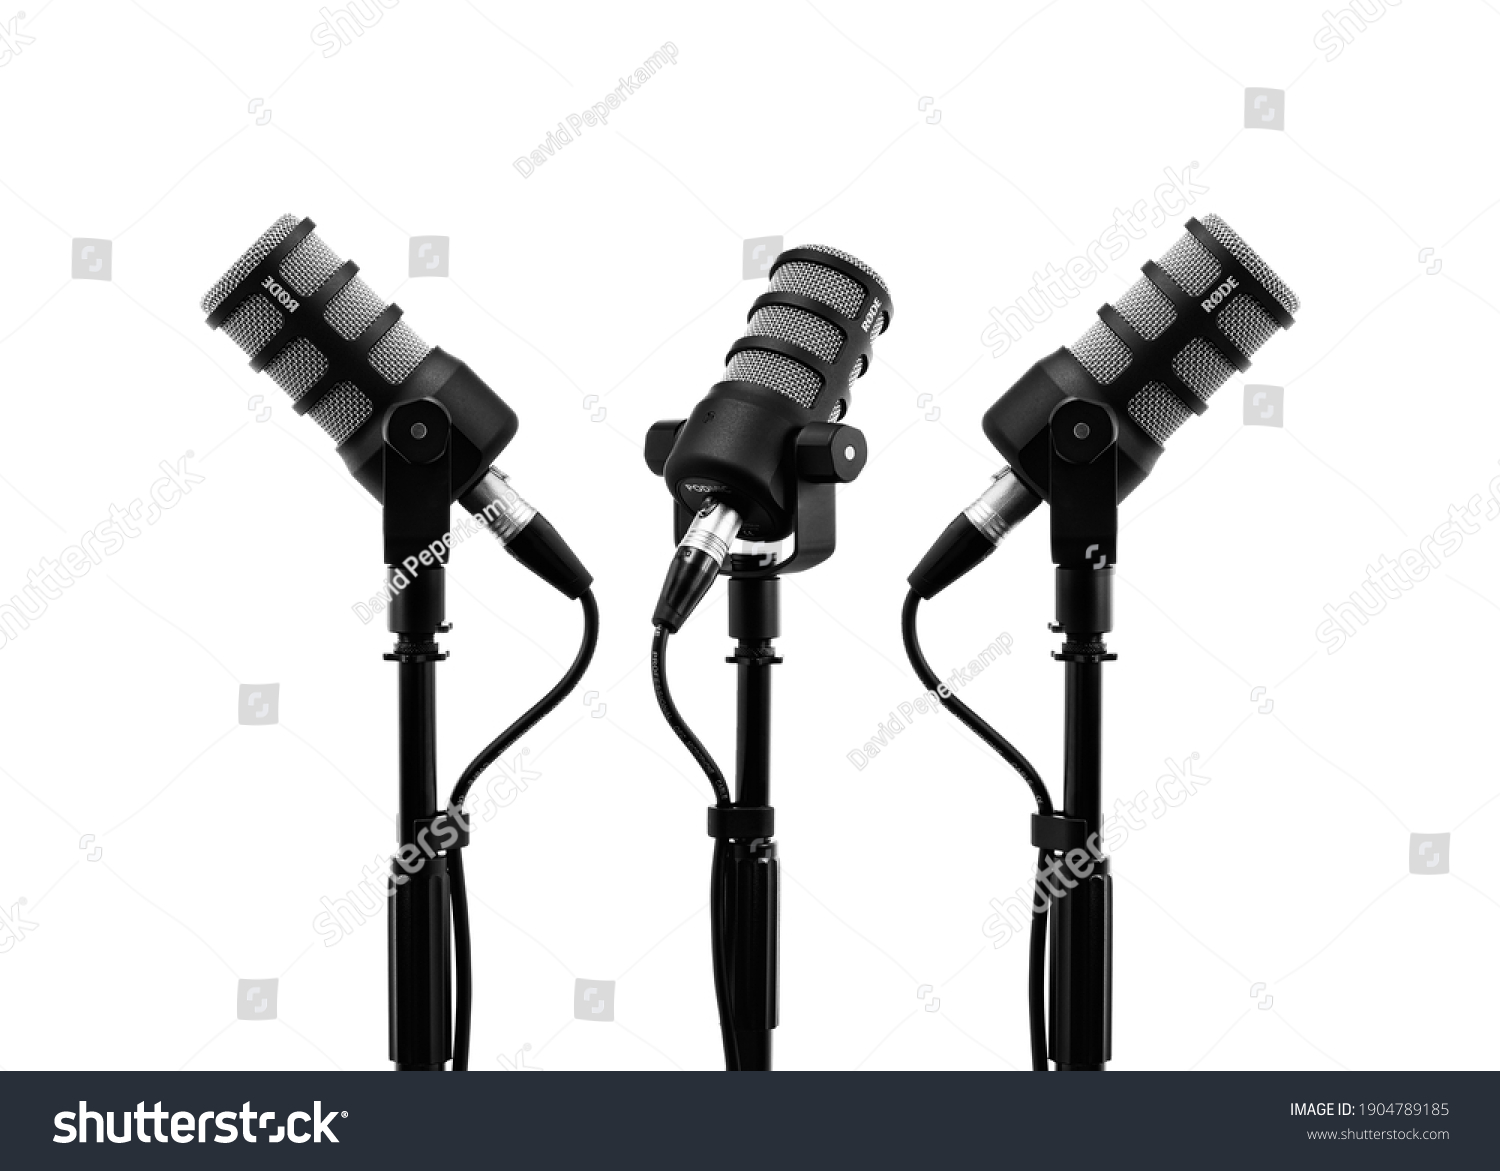 Three podcast microphones on a tripod, a black metal dynamic microphone on an isolated white background, for recording podcast or radio program, show, sound and audio equipment, technology, Photo, DJ #1904789185